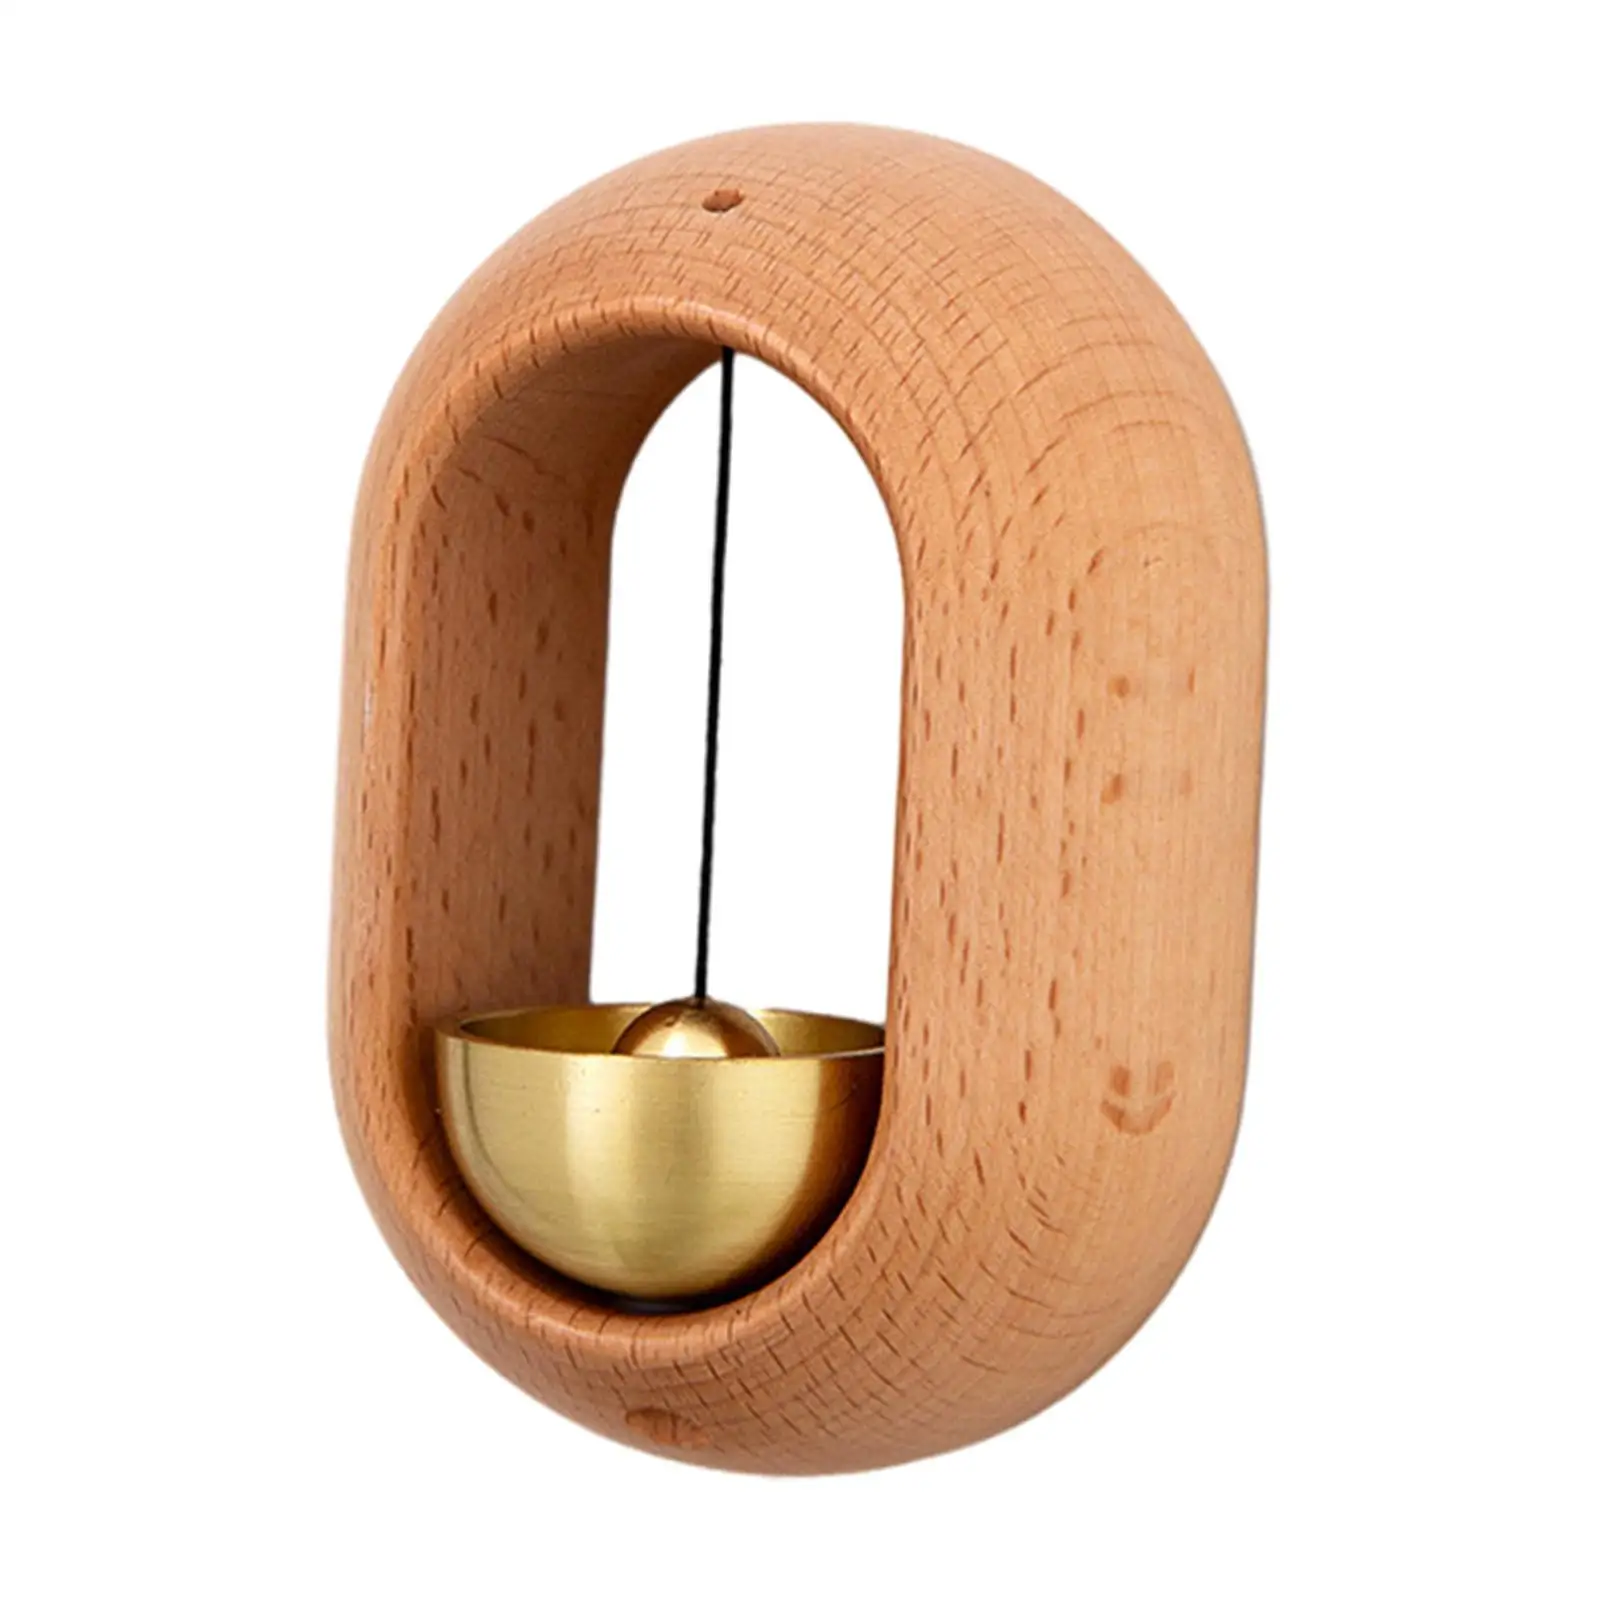 Shopkeepers Bell Japanese Style Wood Lightweight Unique Bell Ornament Doorbells for Barn Door Entrance Business Office